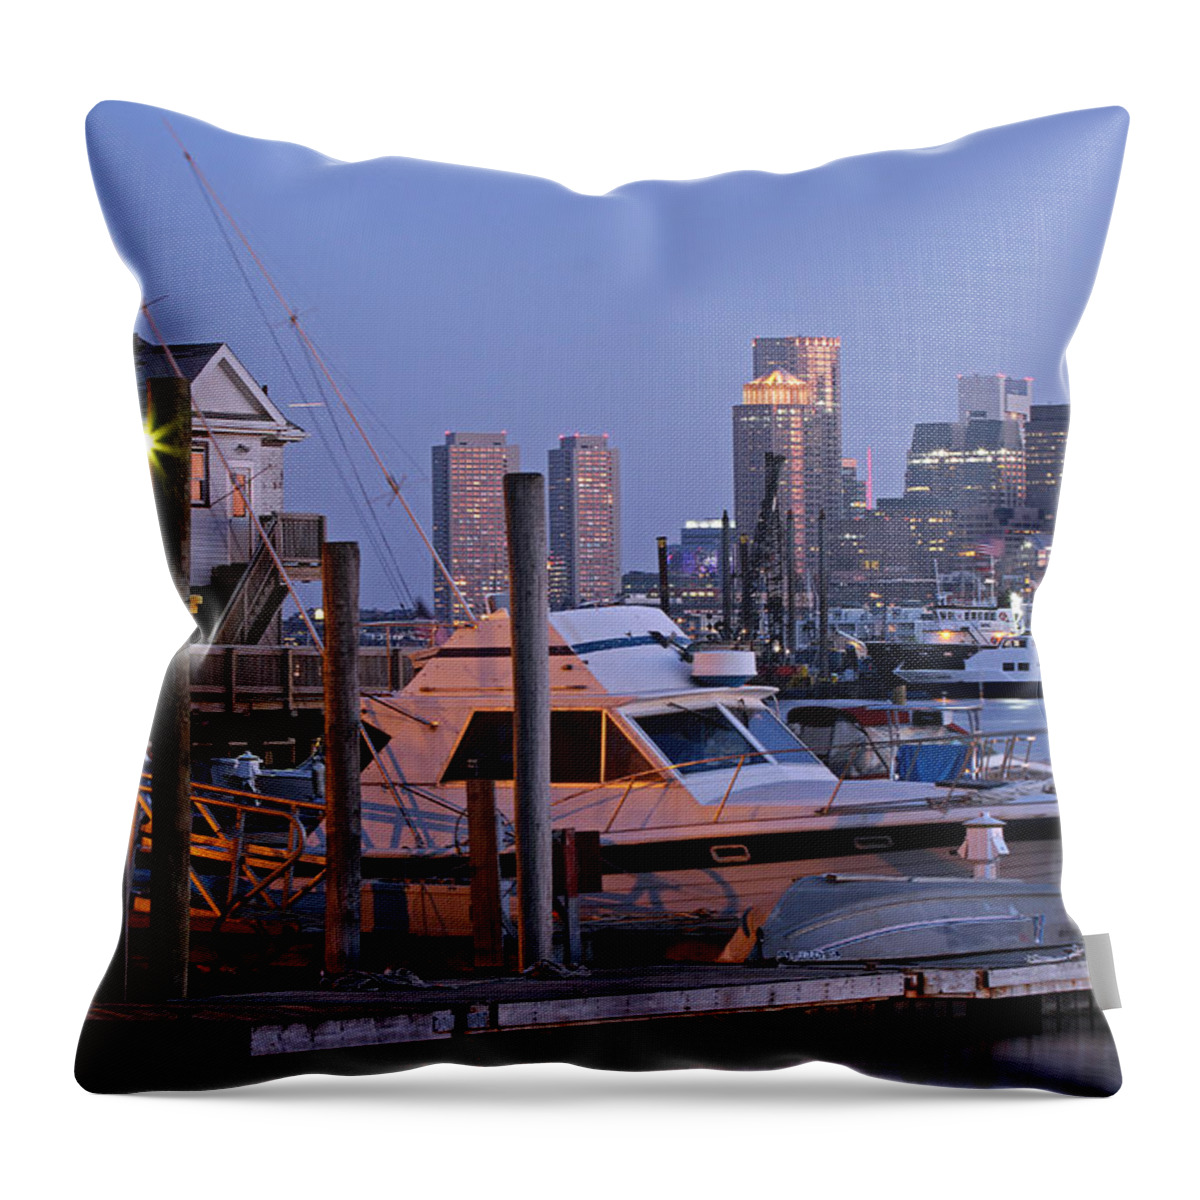 Boston Yachting Throw Pillow featuring the photograph Boston Yachting by Juergen Roth